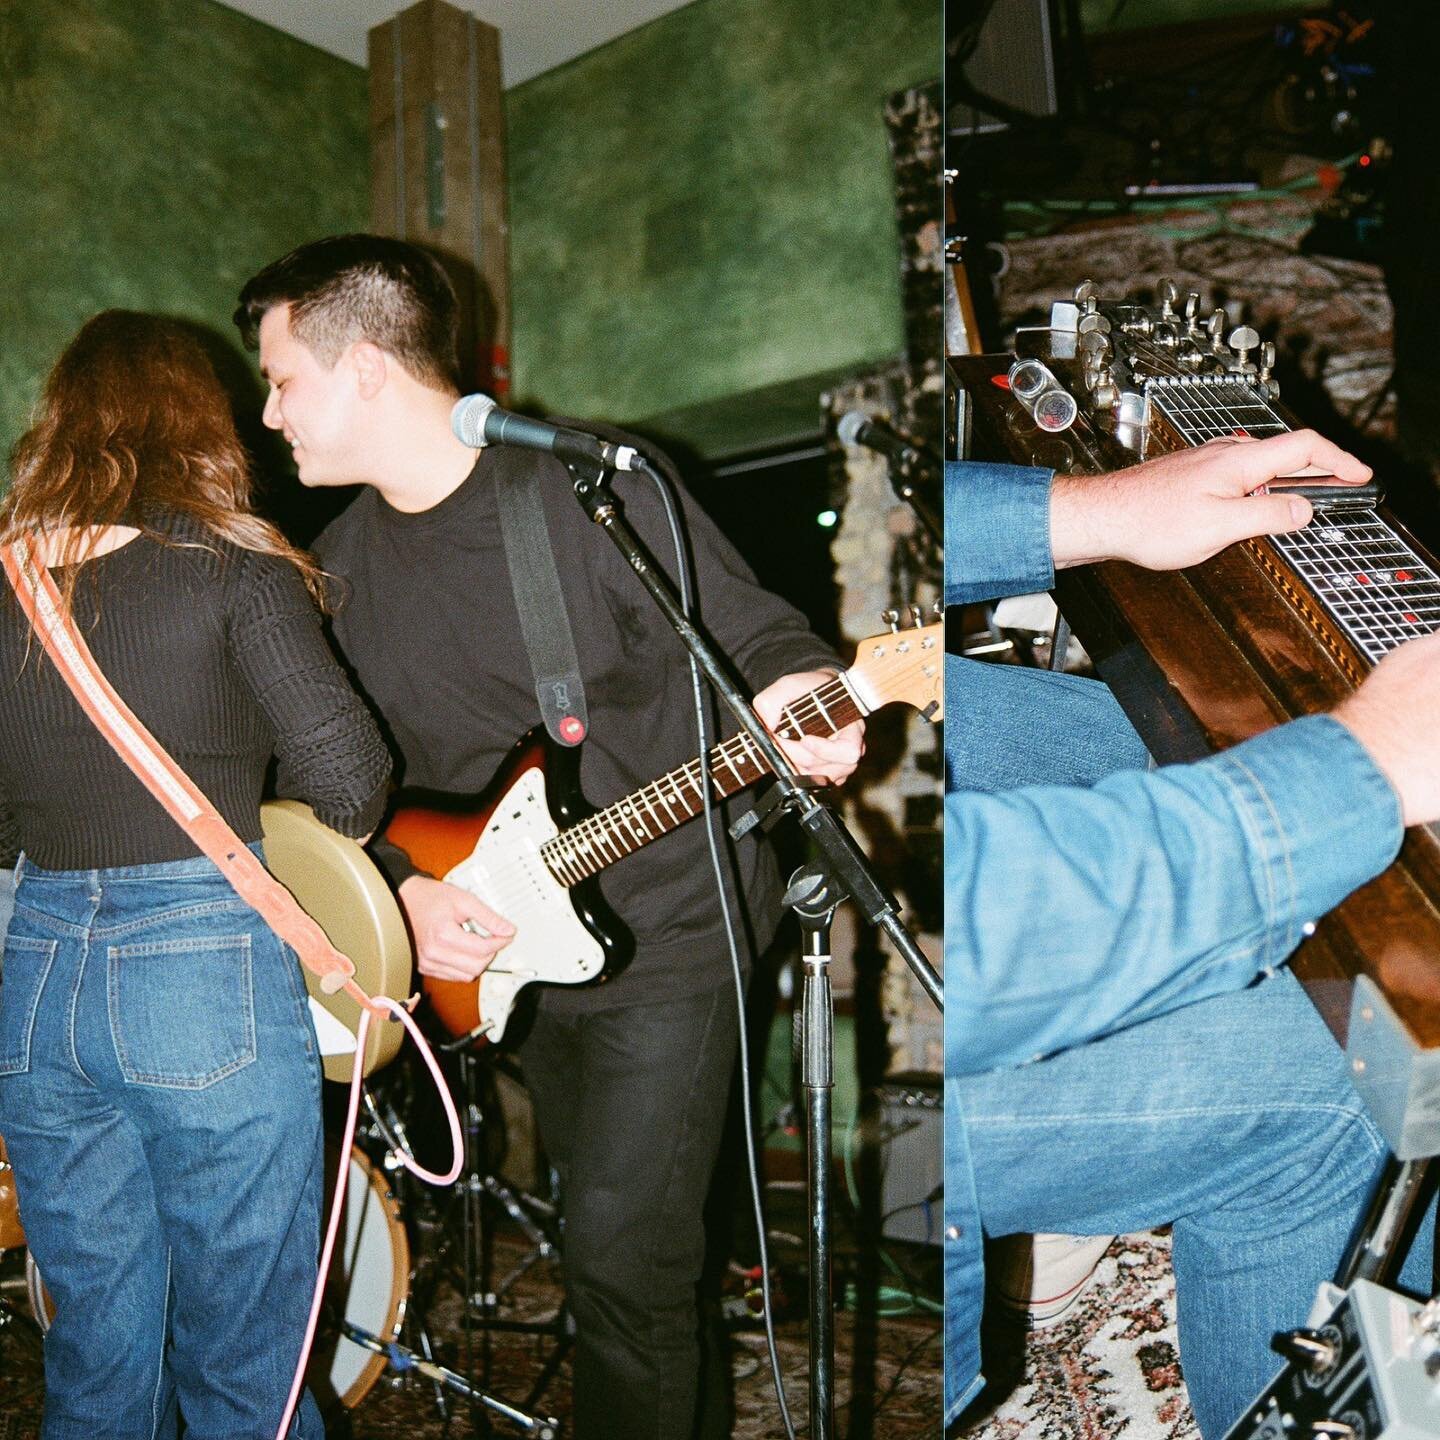 Some photos by @moon___beam from our release show. Thank you to everyone who was there and everyone who helped make it happen. If an EP releases in a forest, y&rsquo;know? So thanks for making it special and we&rsquo;ll see you at the next one!